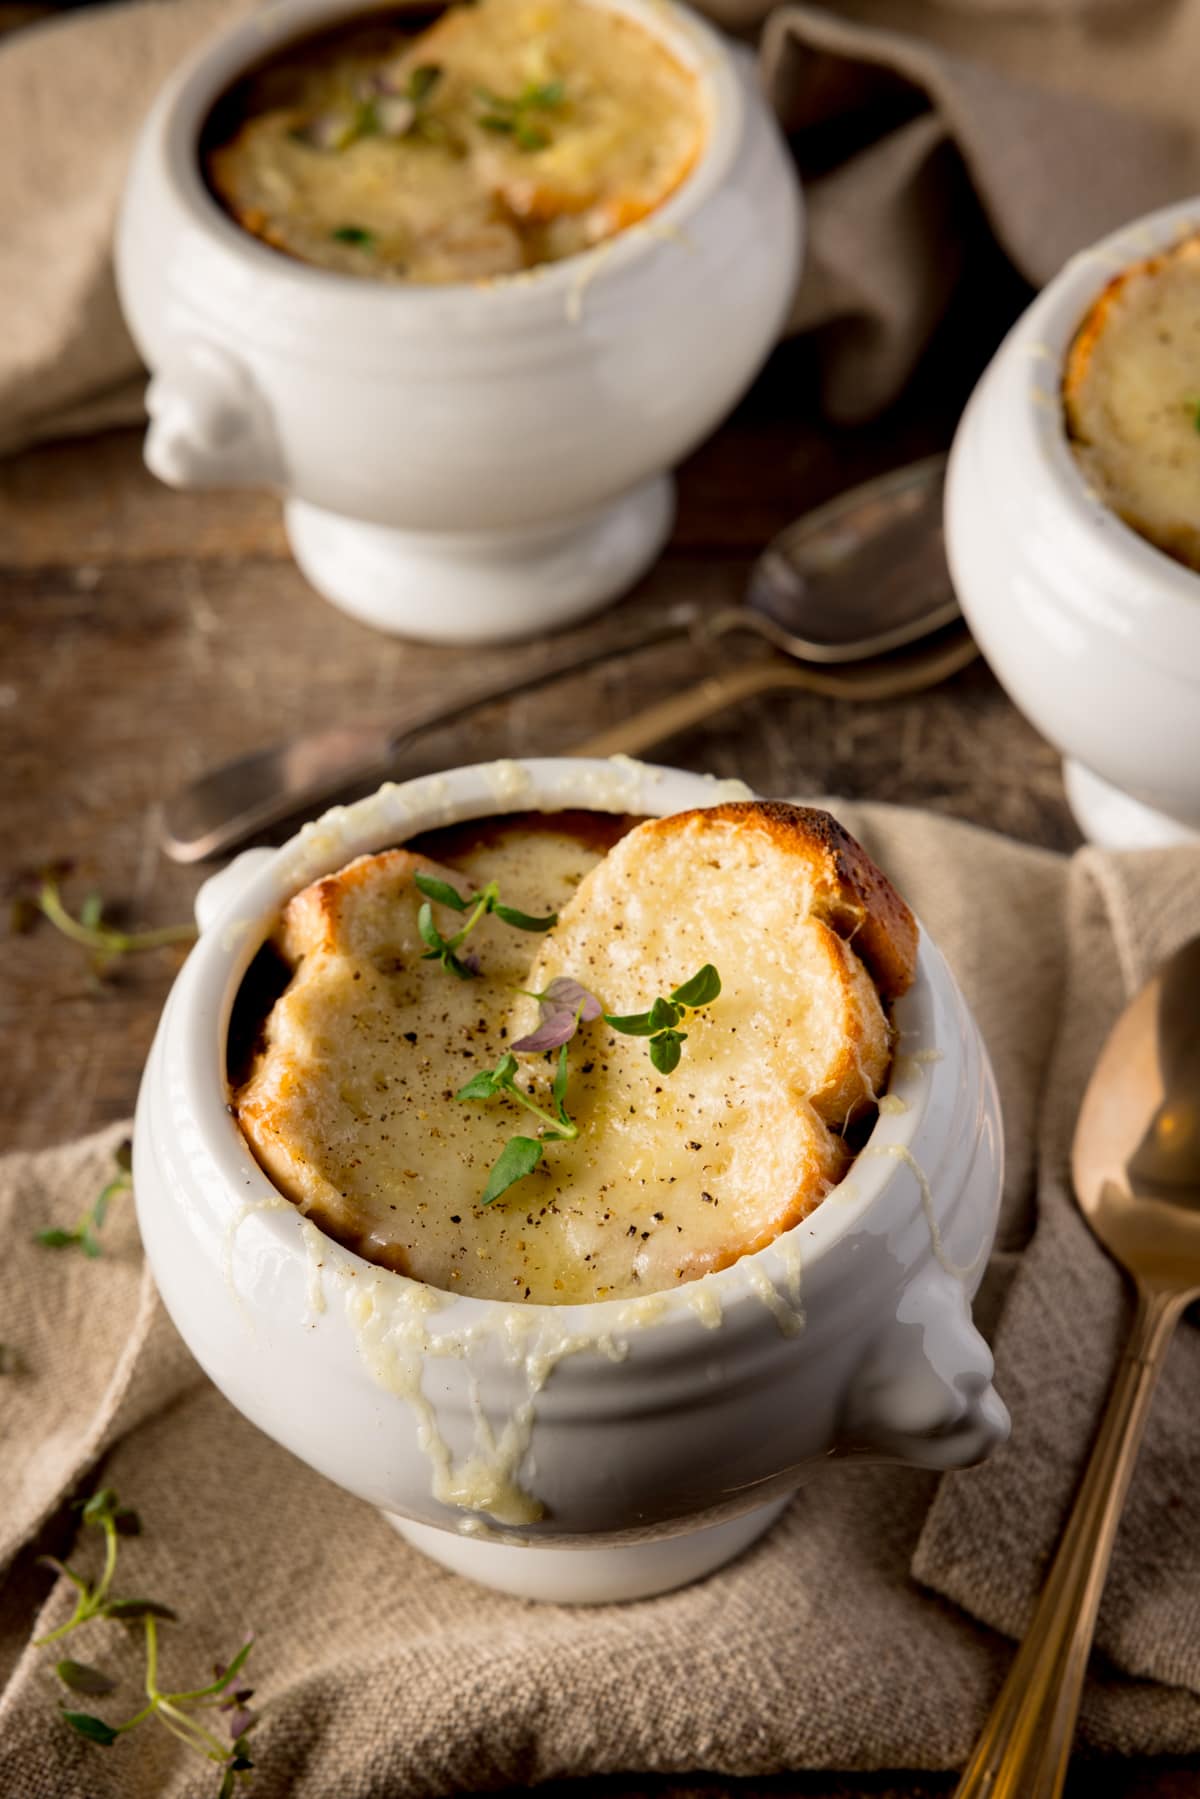 Three bowls of French Onion Soup on a wooden table. The soups are in white bowls and there is a beige napkin under the front bowl of soup. Each soup is topped with a little fresh thyme.